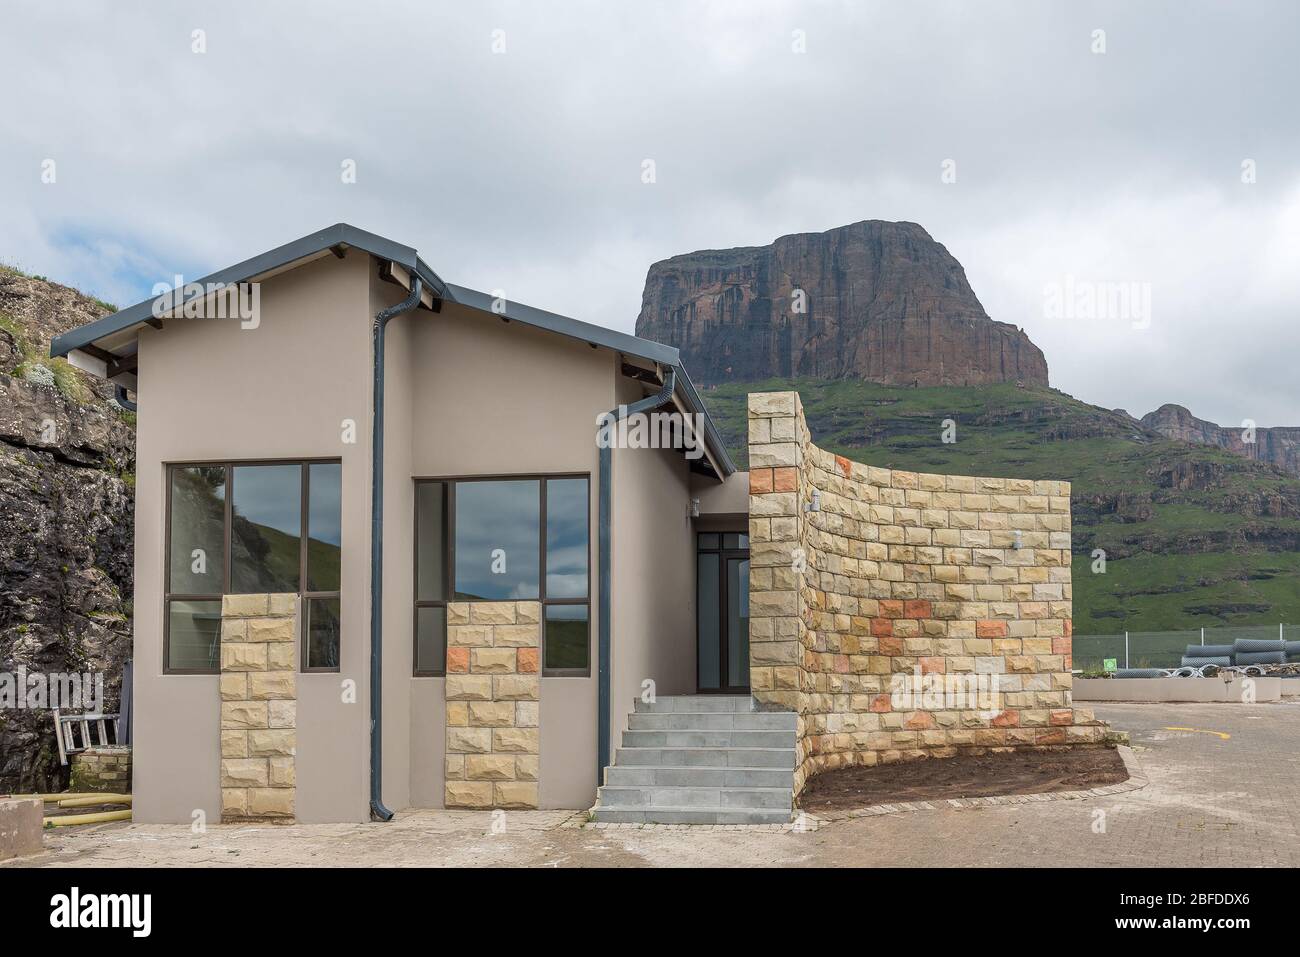 QWAQWA, SOUTH AFRICA - MARCH 4, 2020: Building at the parking area at the start of the Sentinel hiking trail to Tugela Falls. The Sentinel Peak is vis Stock Photo